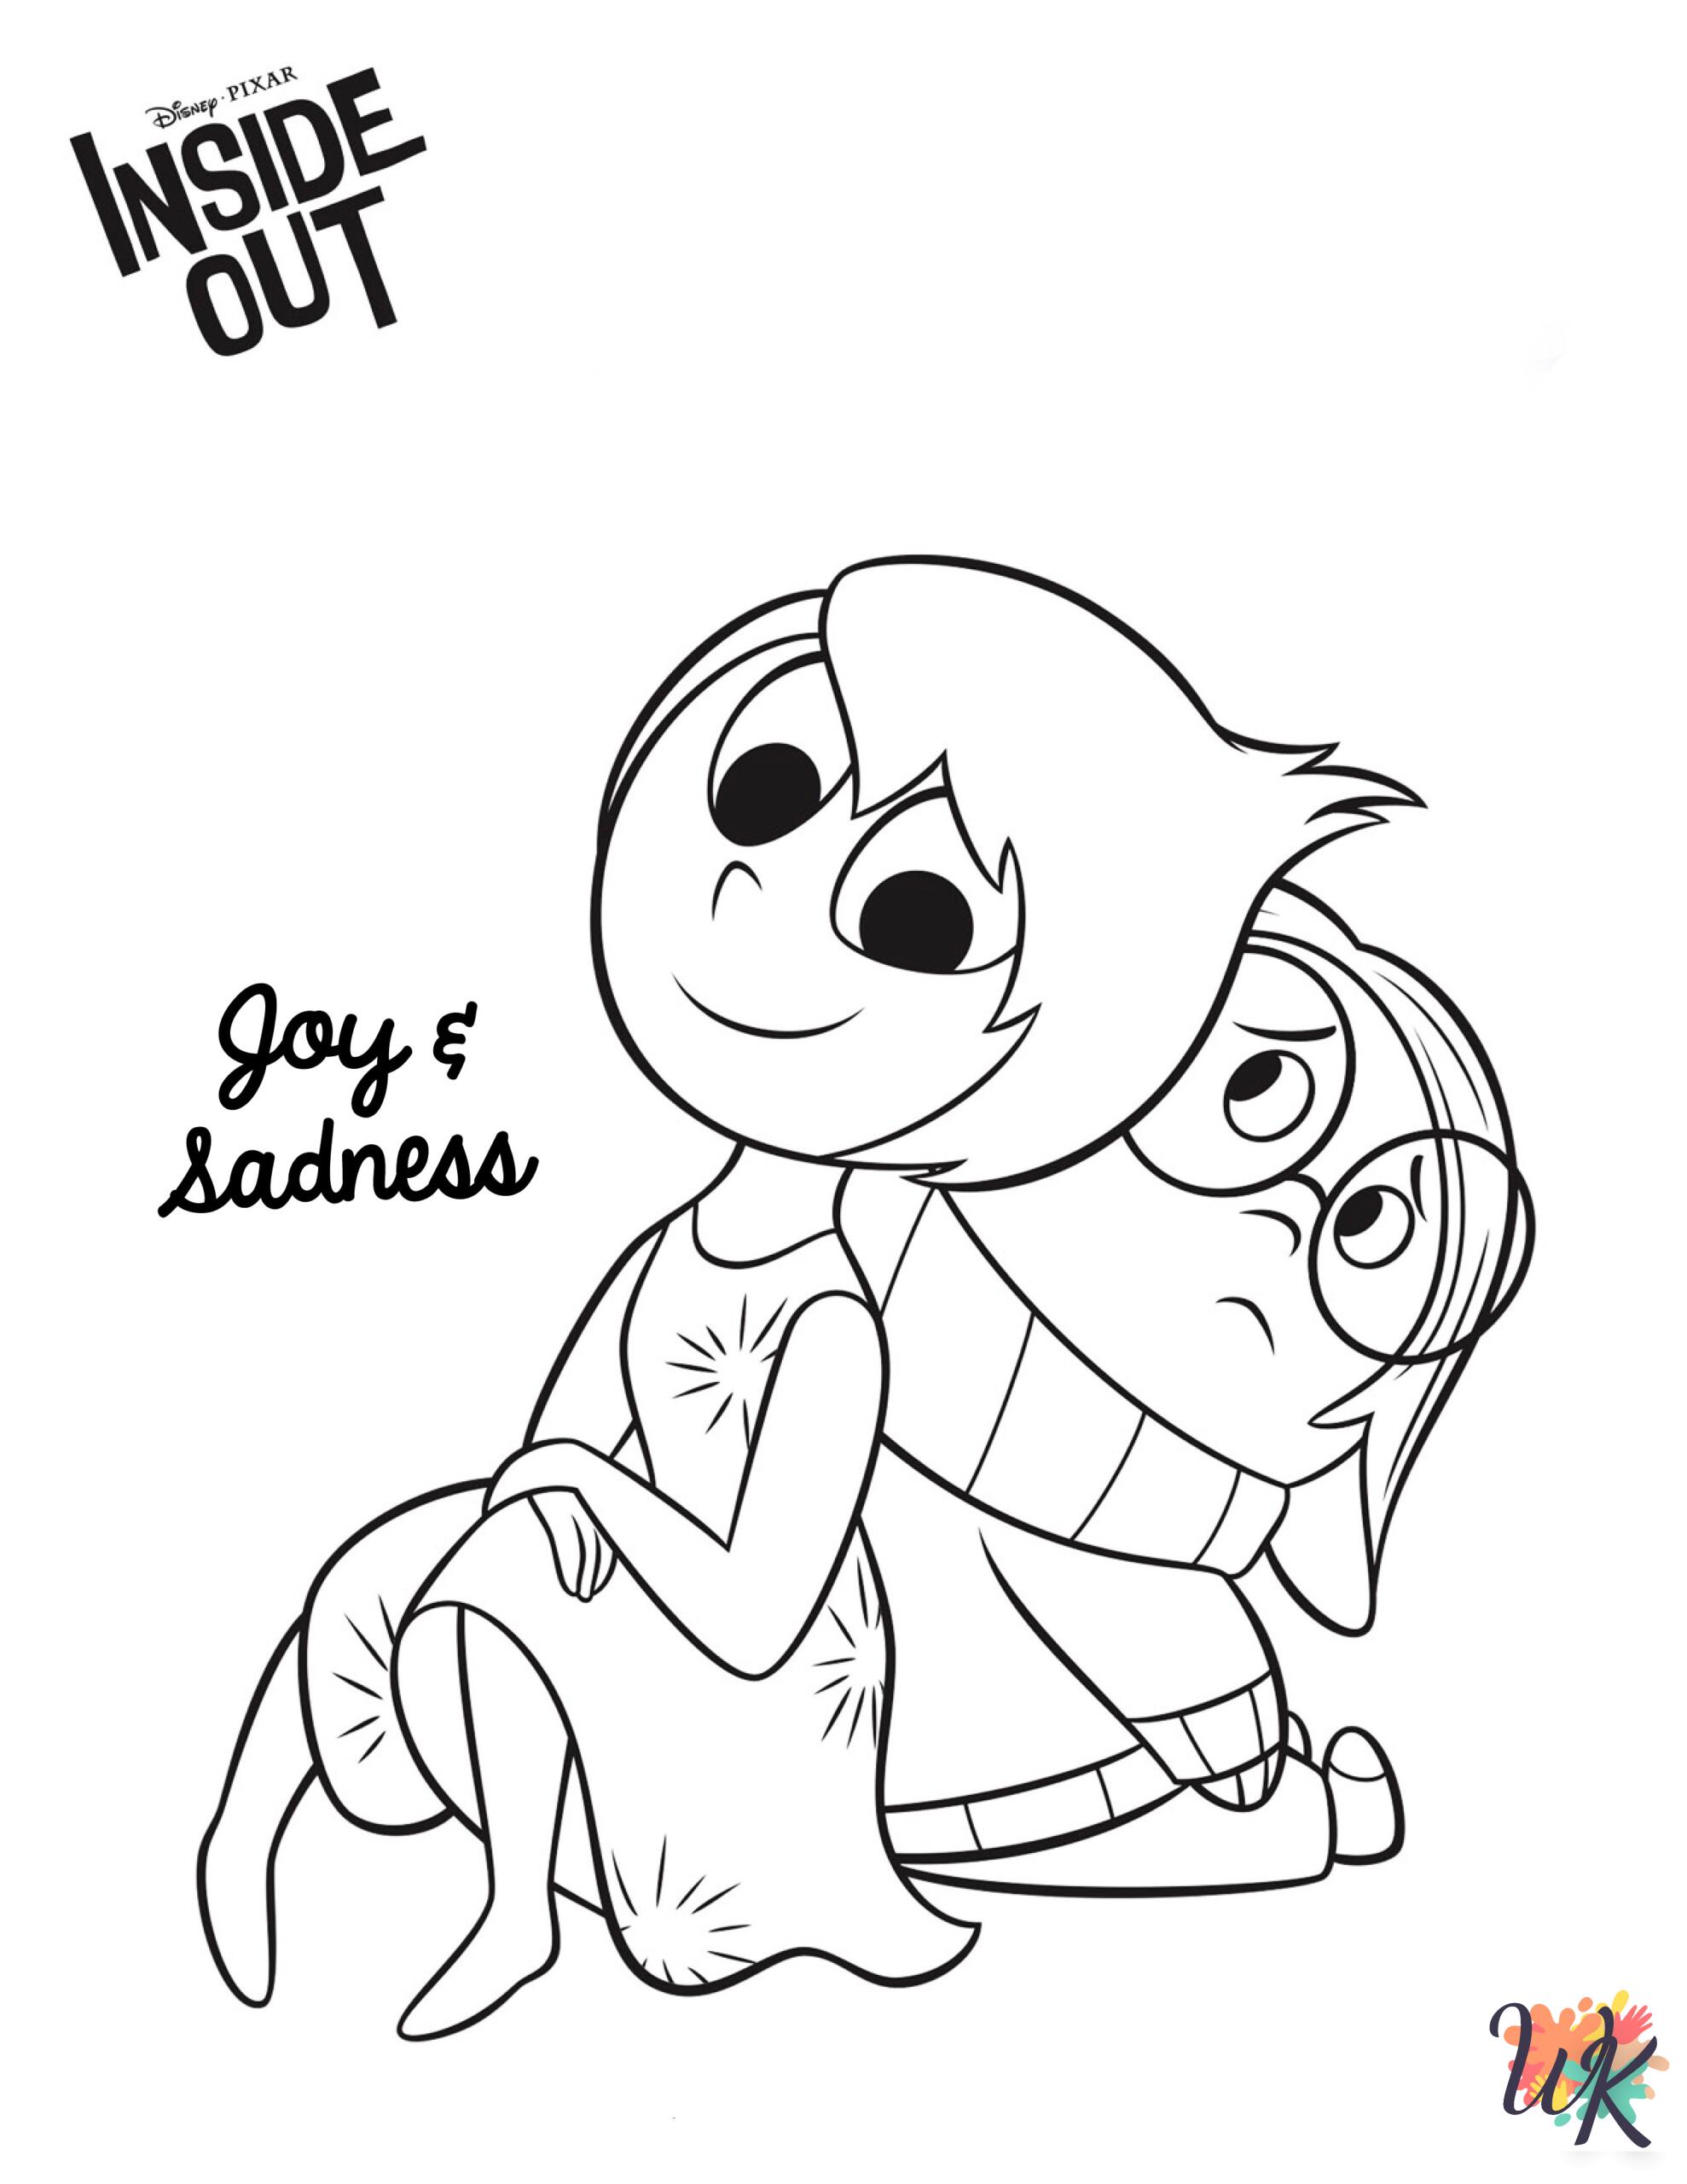 Inside Out coloring pages for preschoolers